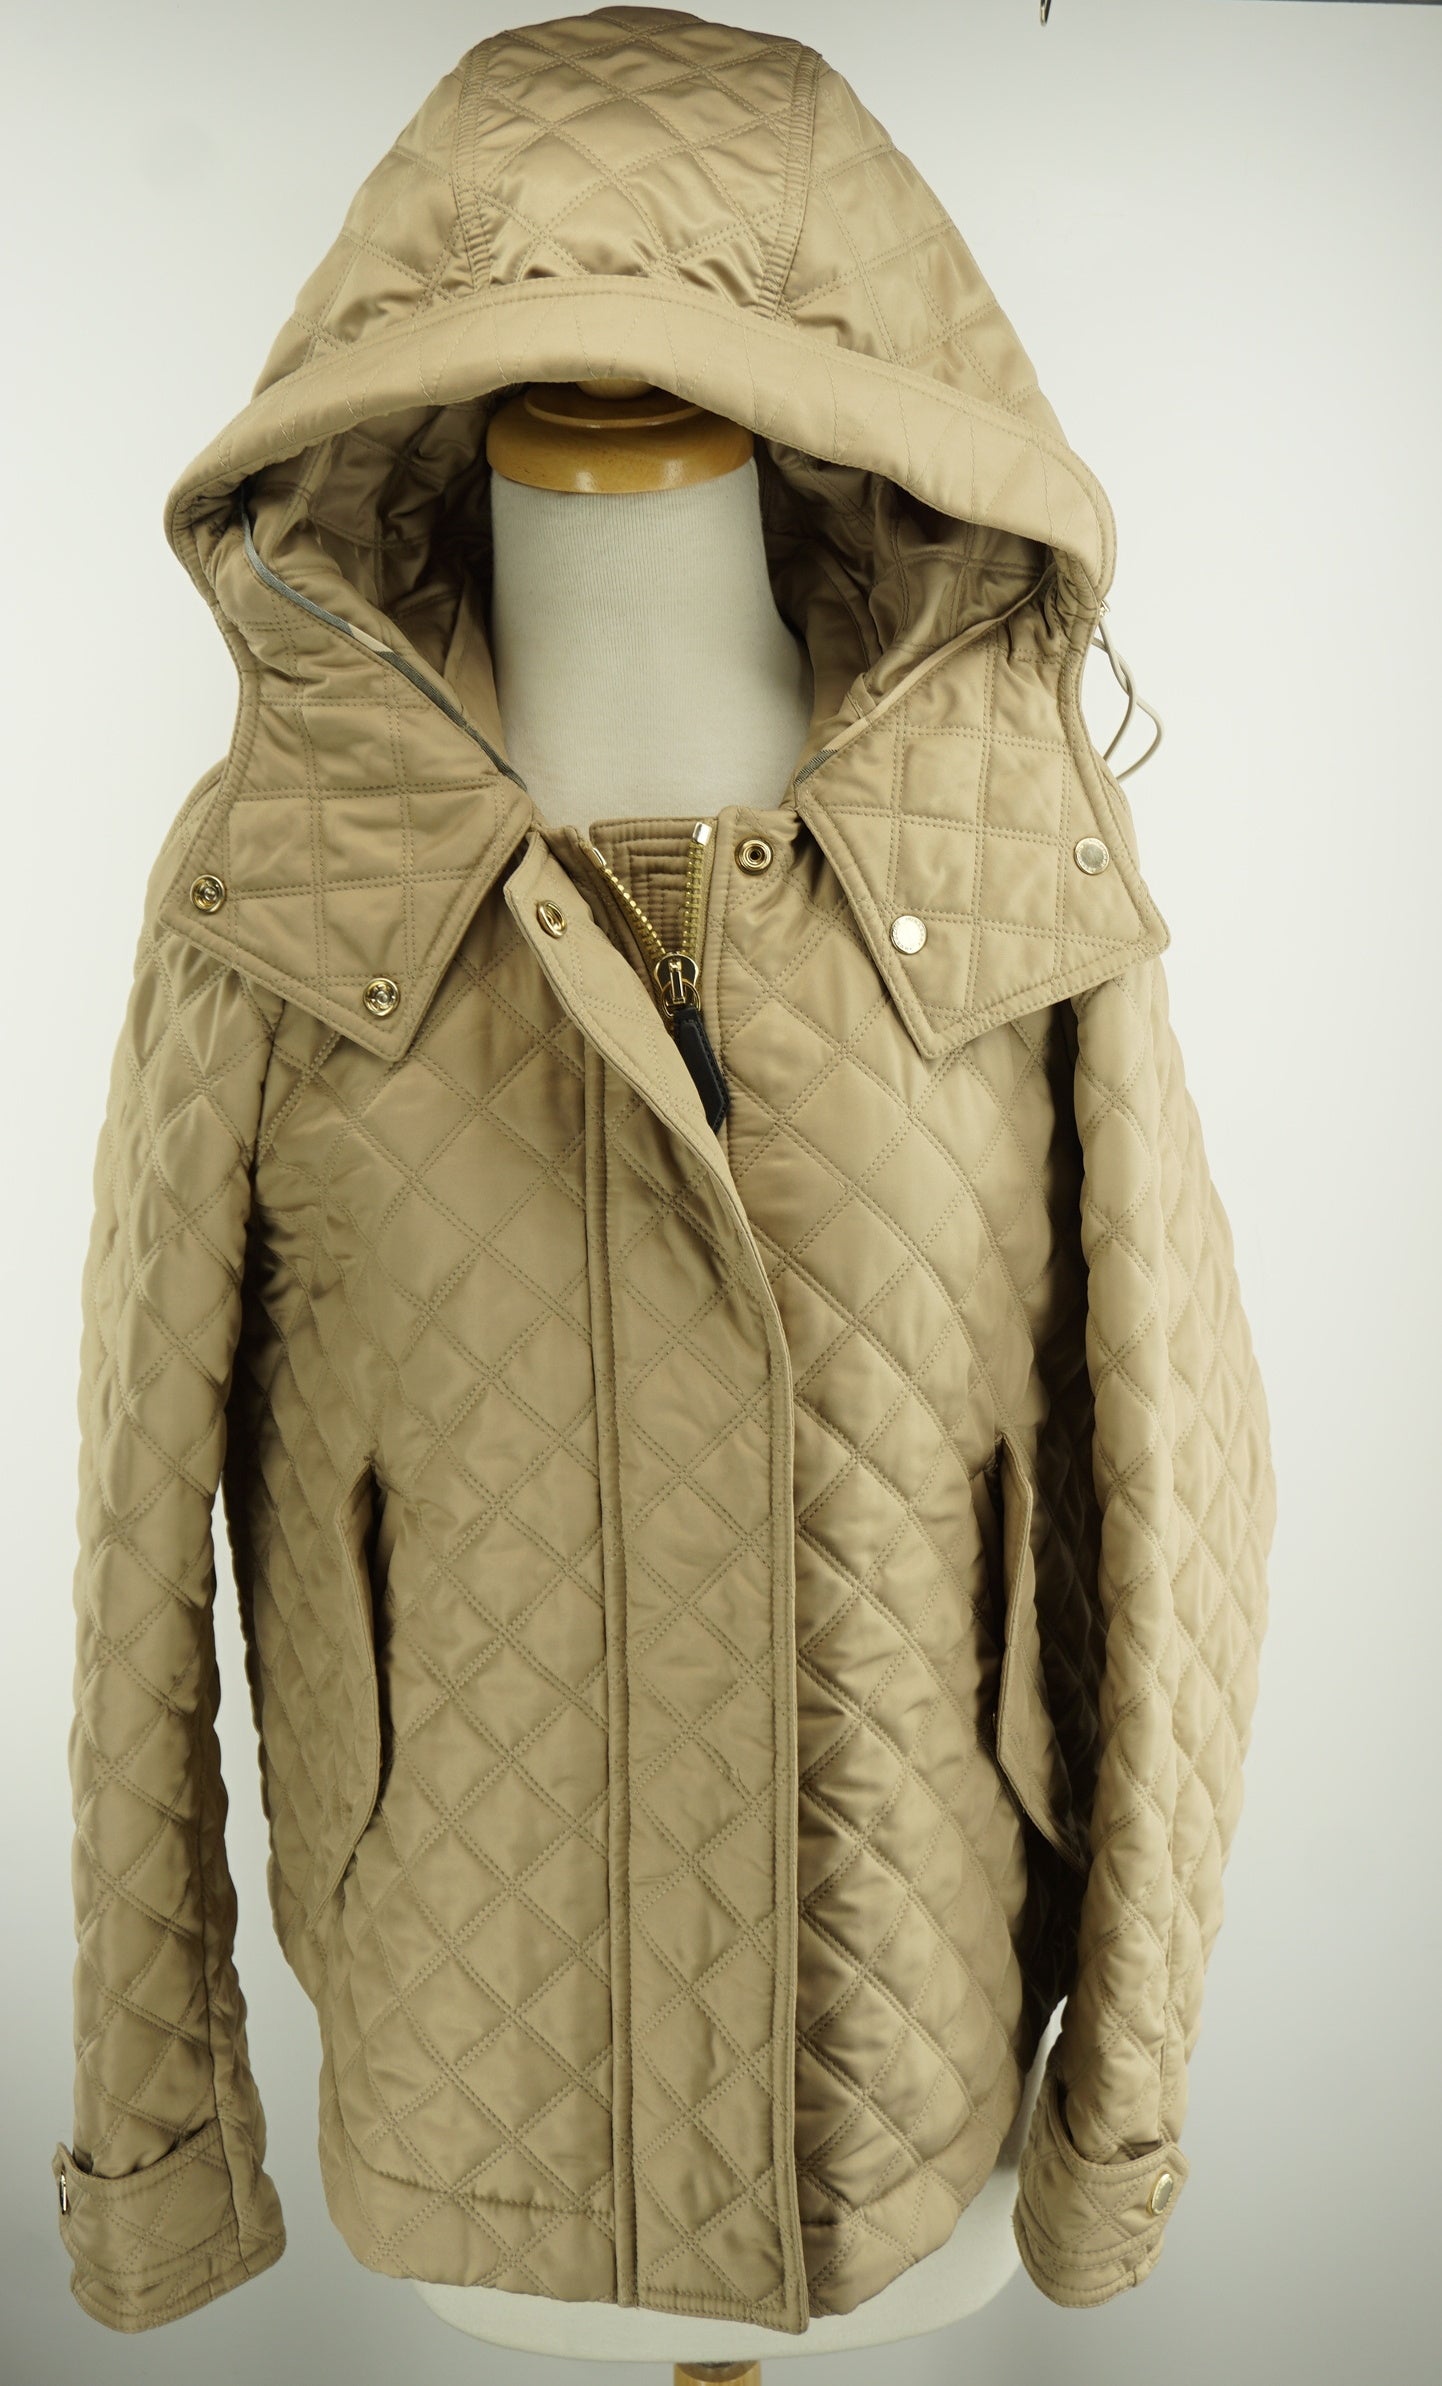 Burberry Brit Leightonbury Diamond Quilted coat size Small / Petite $895 hooded